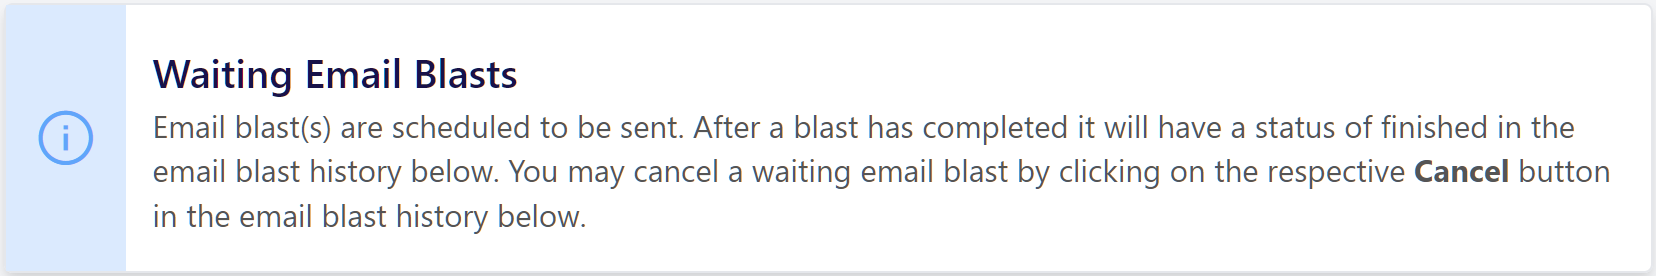 EM_redesign_waiting_active_waiting_email_blast_message